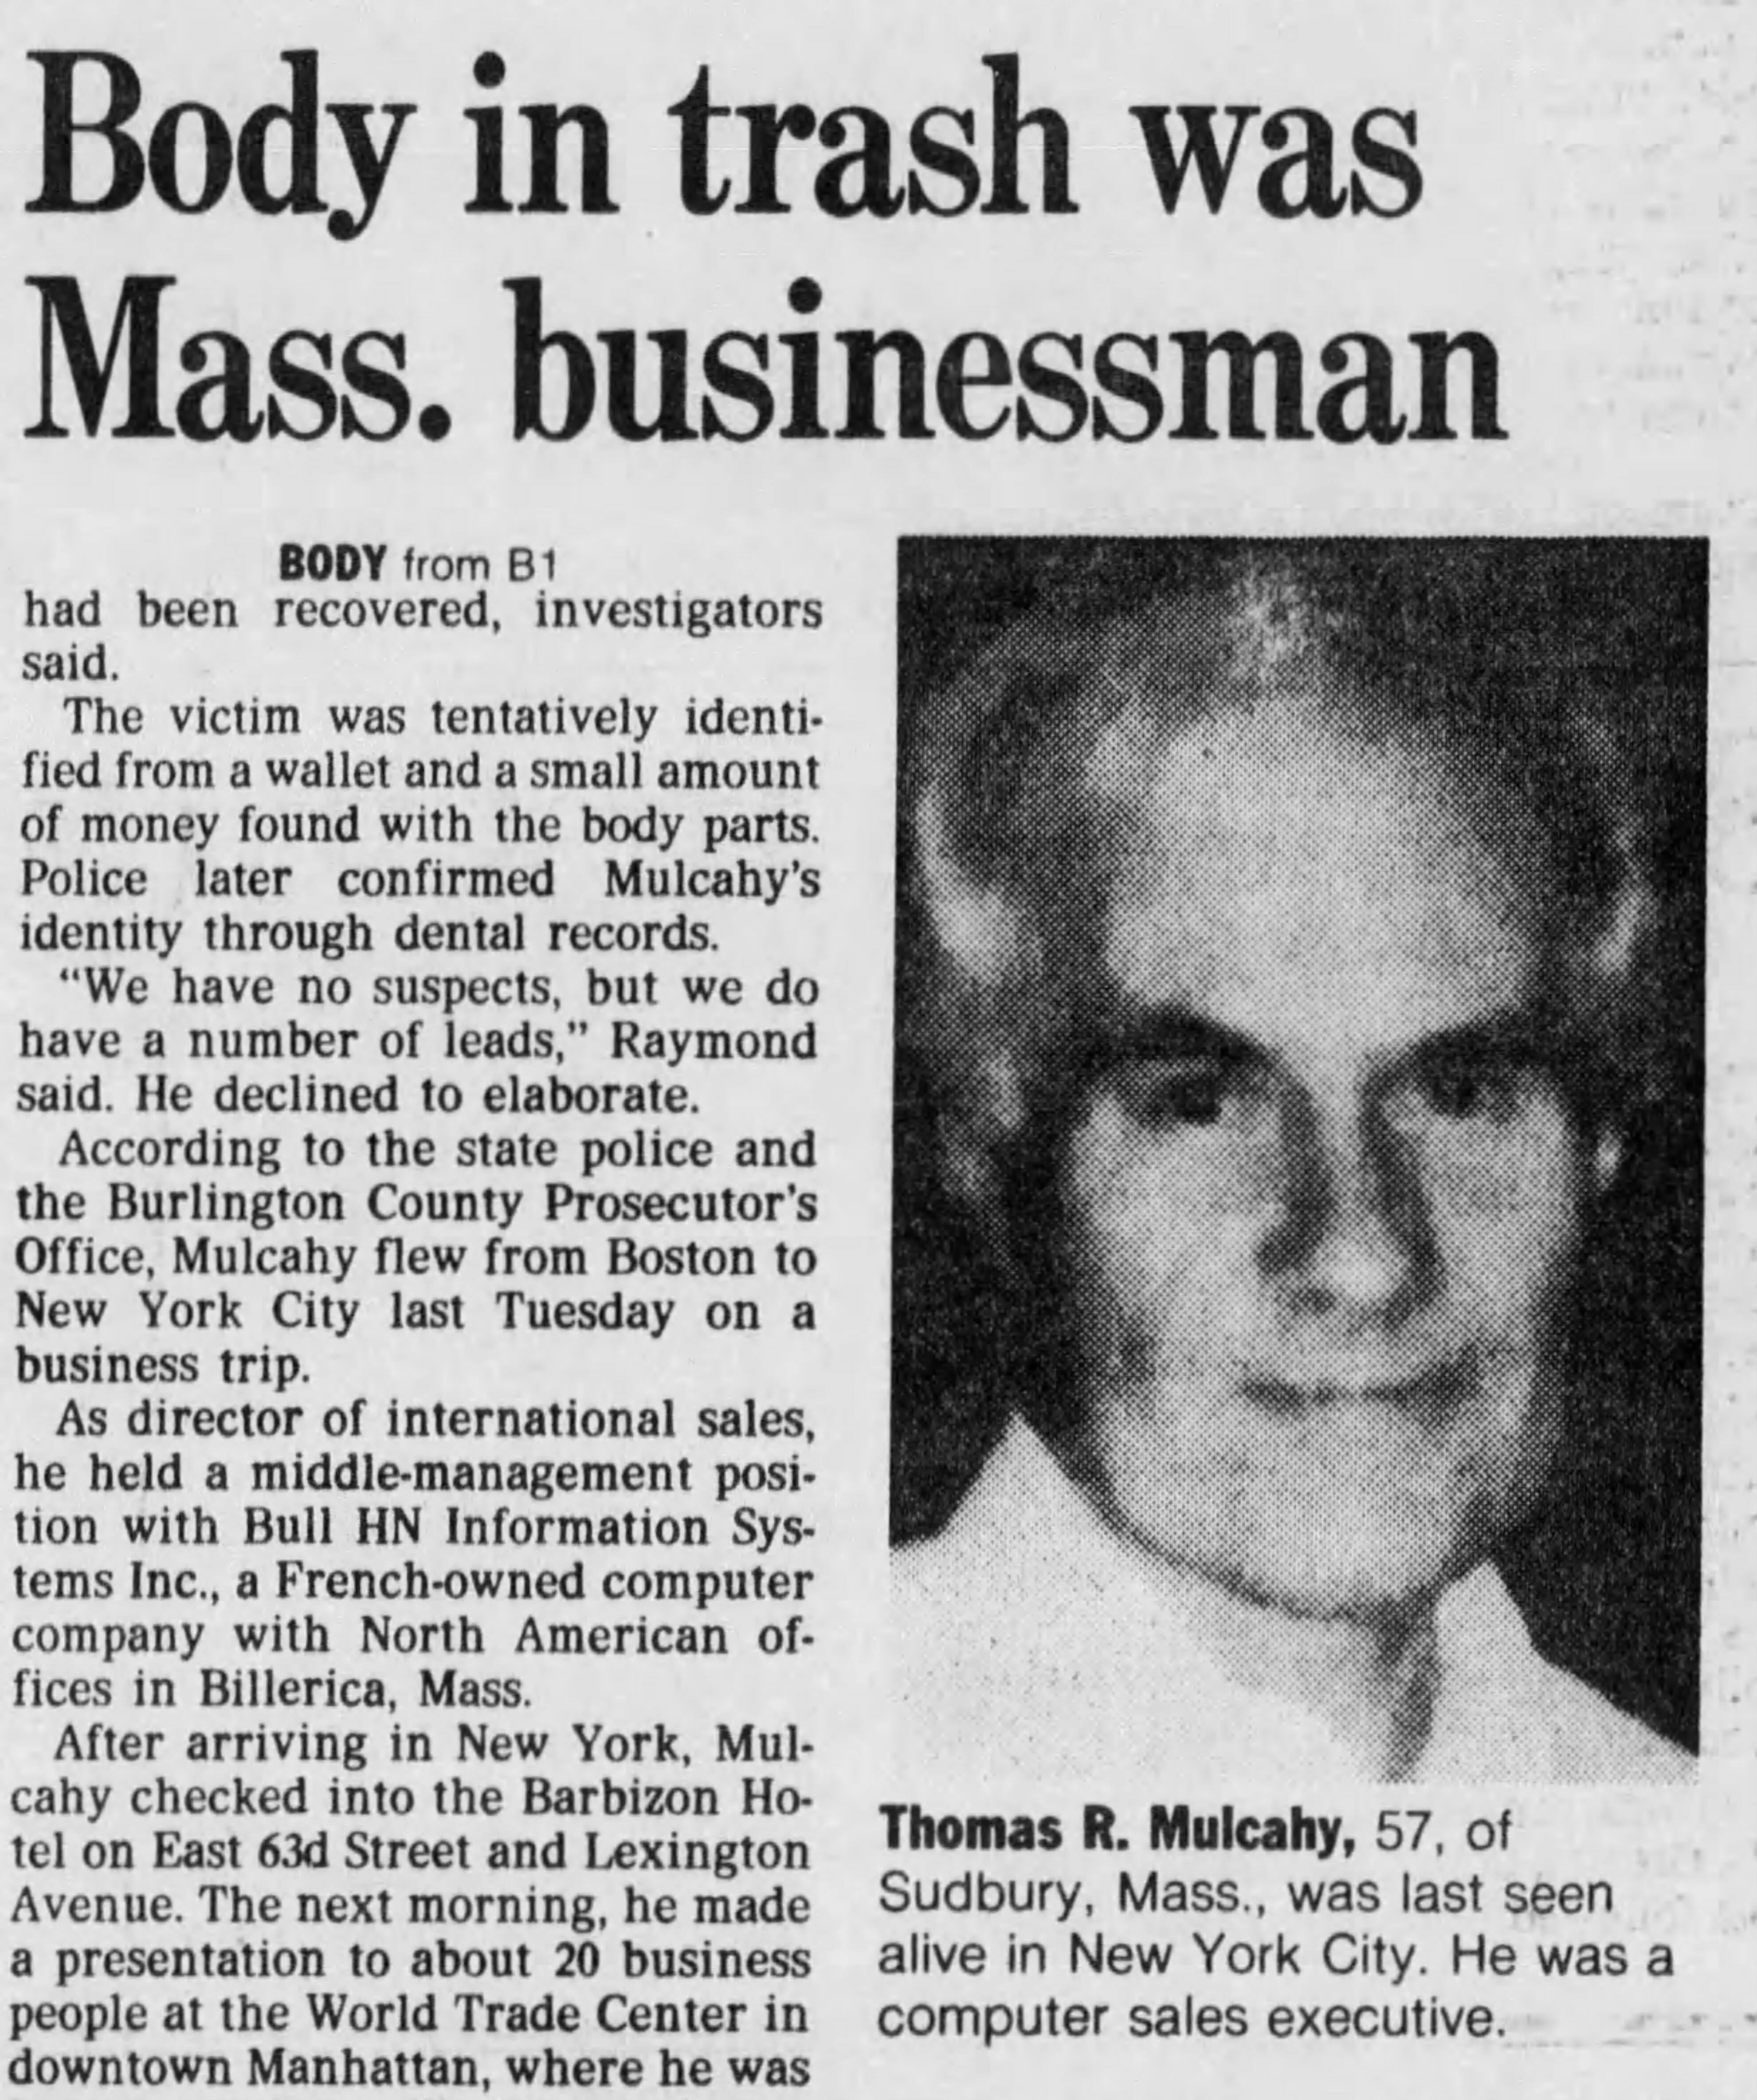 A July 14, 1992, edition of The Inquirer details the murder of Thomas R. Mulcahy.